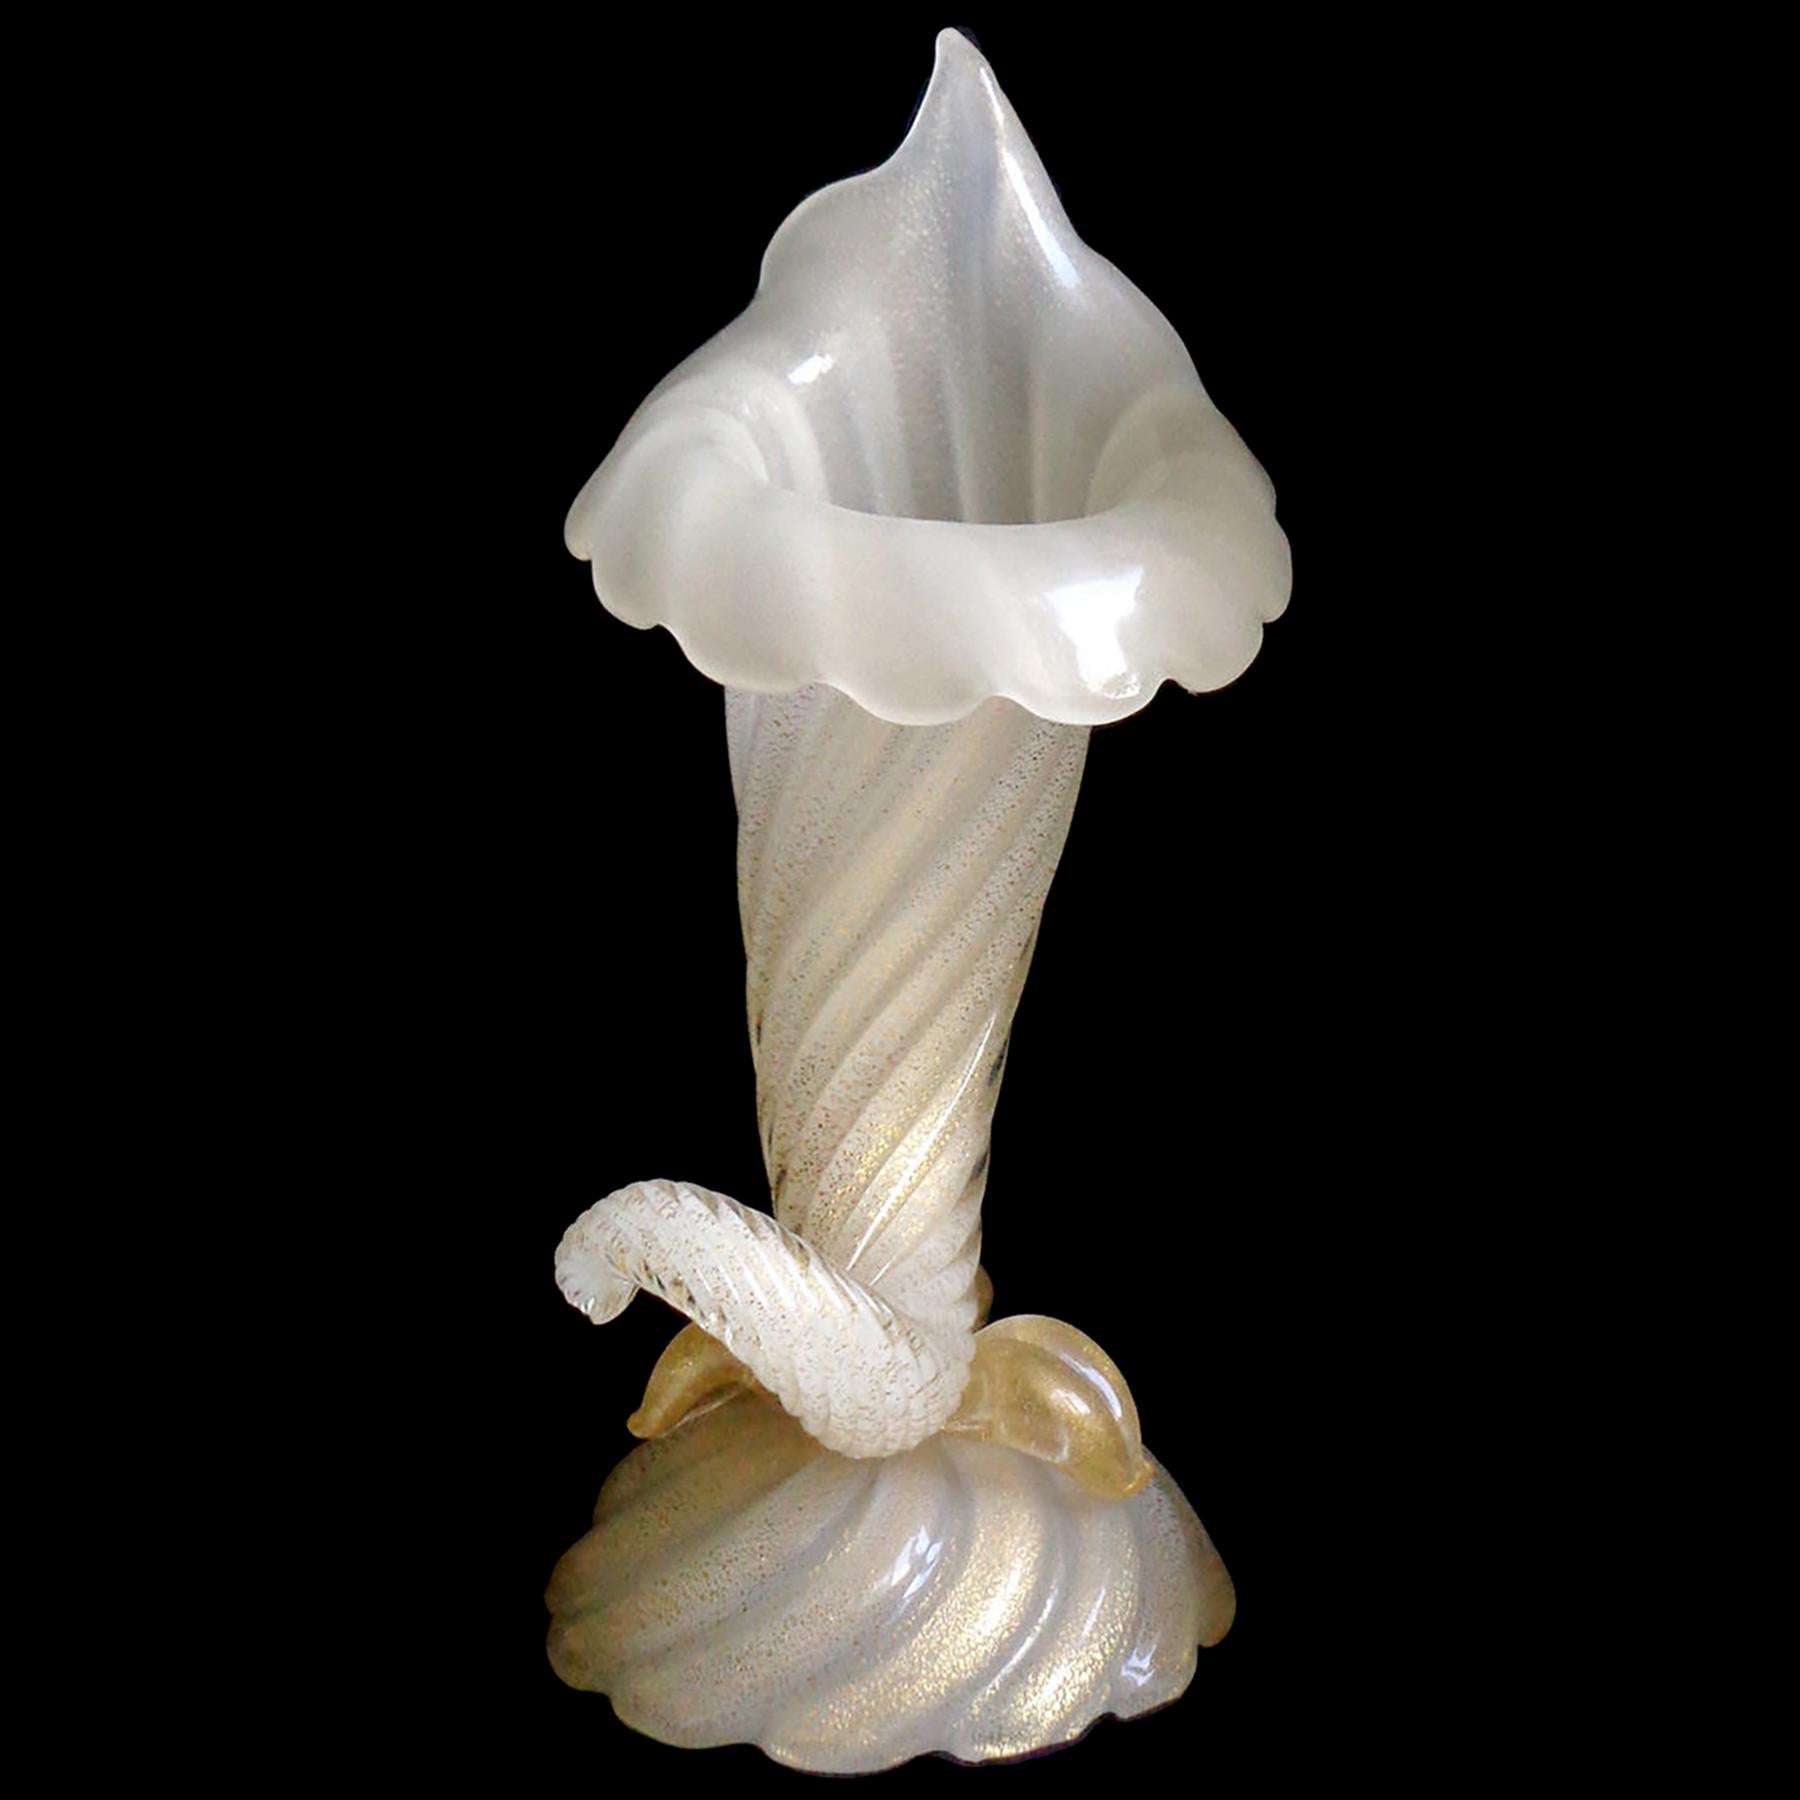 Beautiful vintage Murano hand blown opal white and gold flecks Italian art glass cornucopia flower vase. Documented to designer Archimede Seguso, circa 1950s, and published in his book. The vase still retains an original 